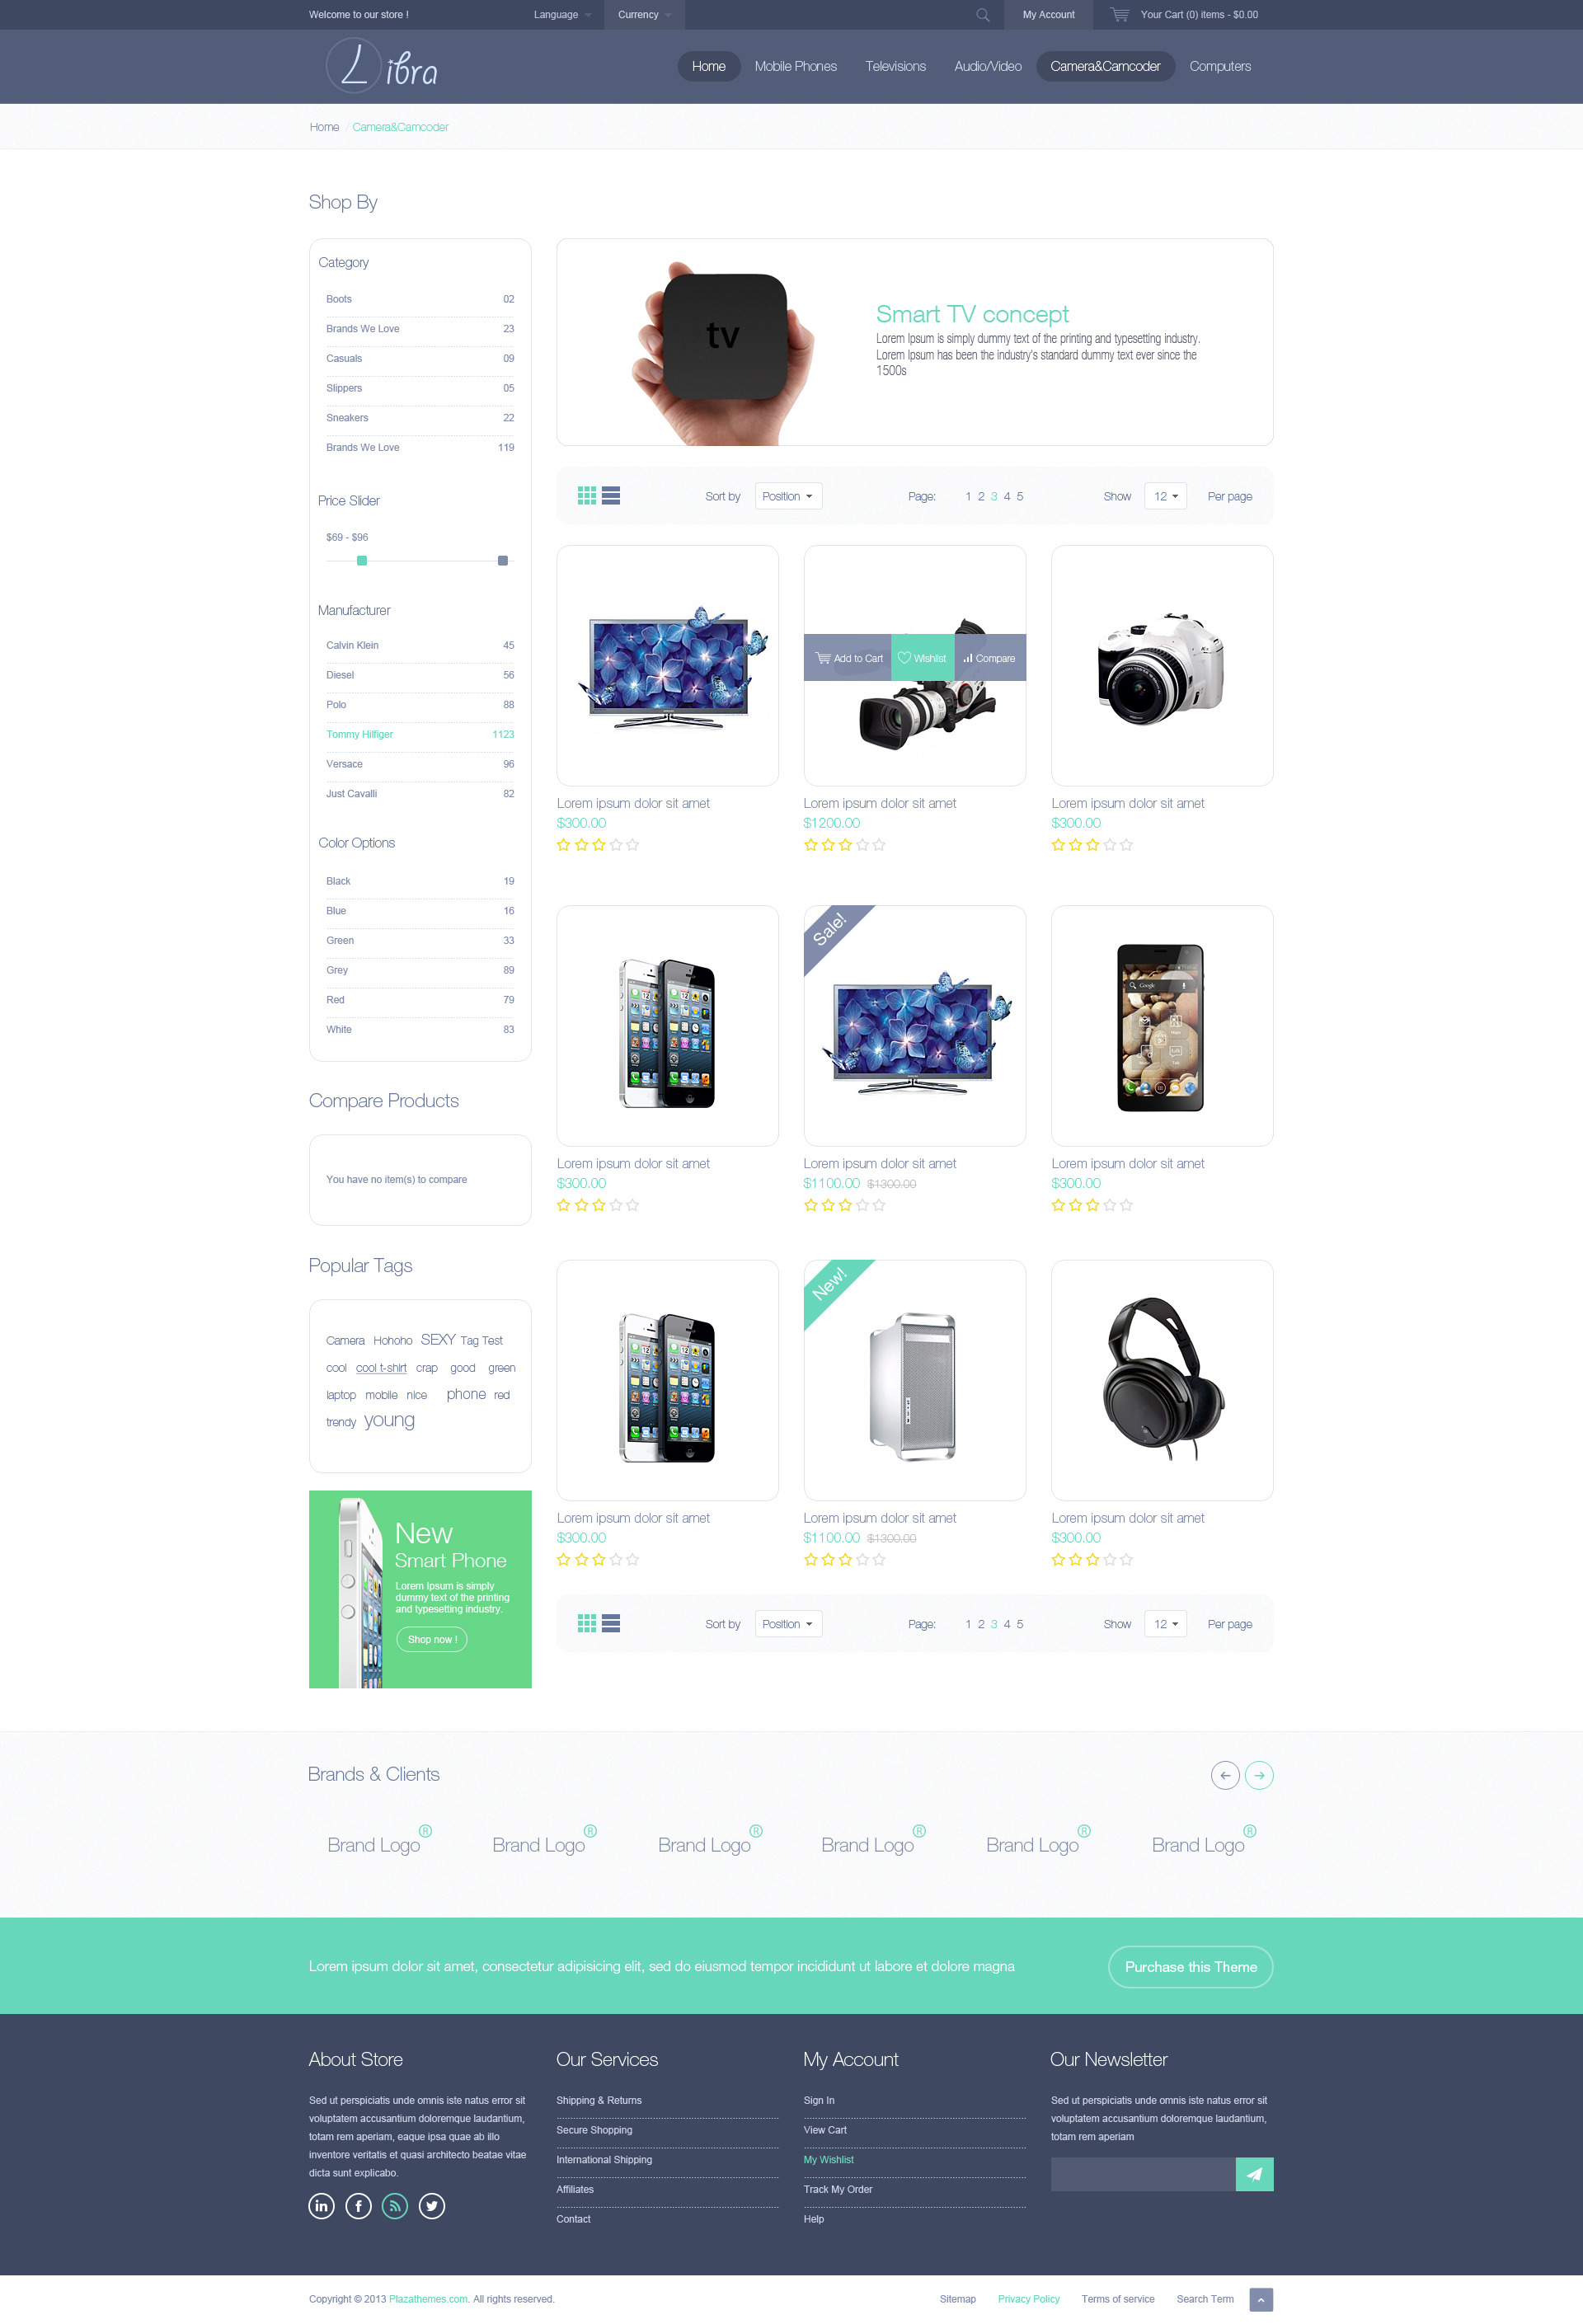 Product list page 2